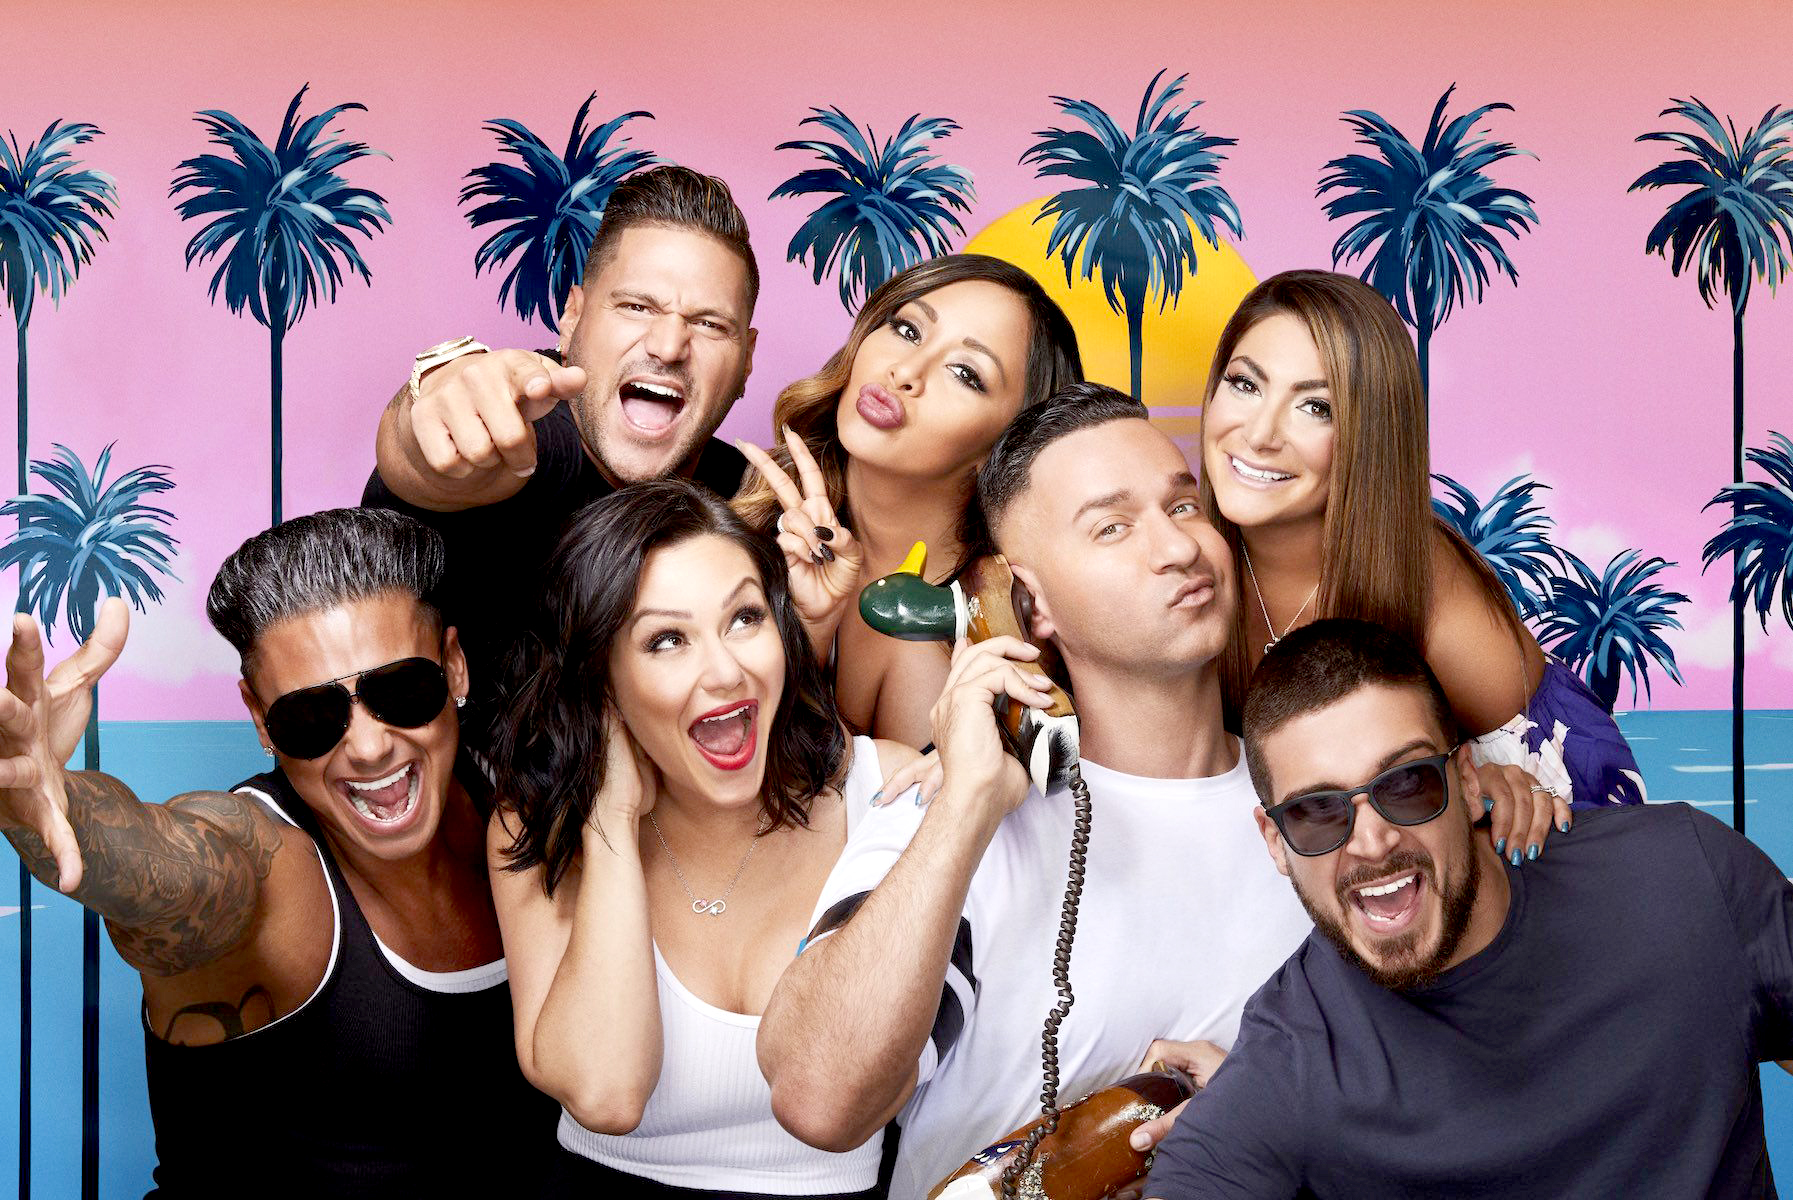 The Most Classy and Elegant 'Jersey Shore' Fashion Moments